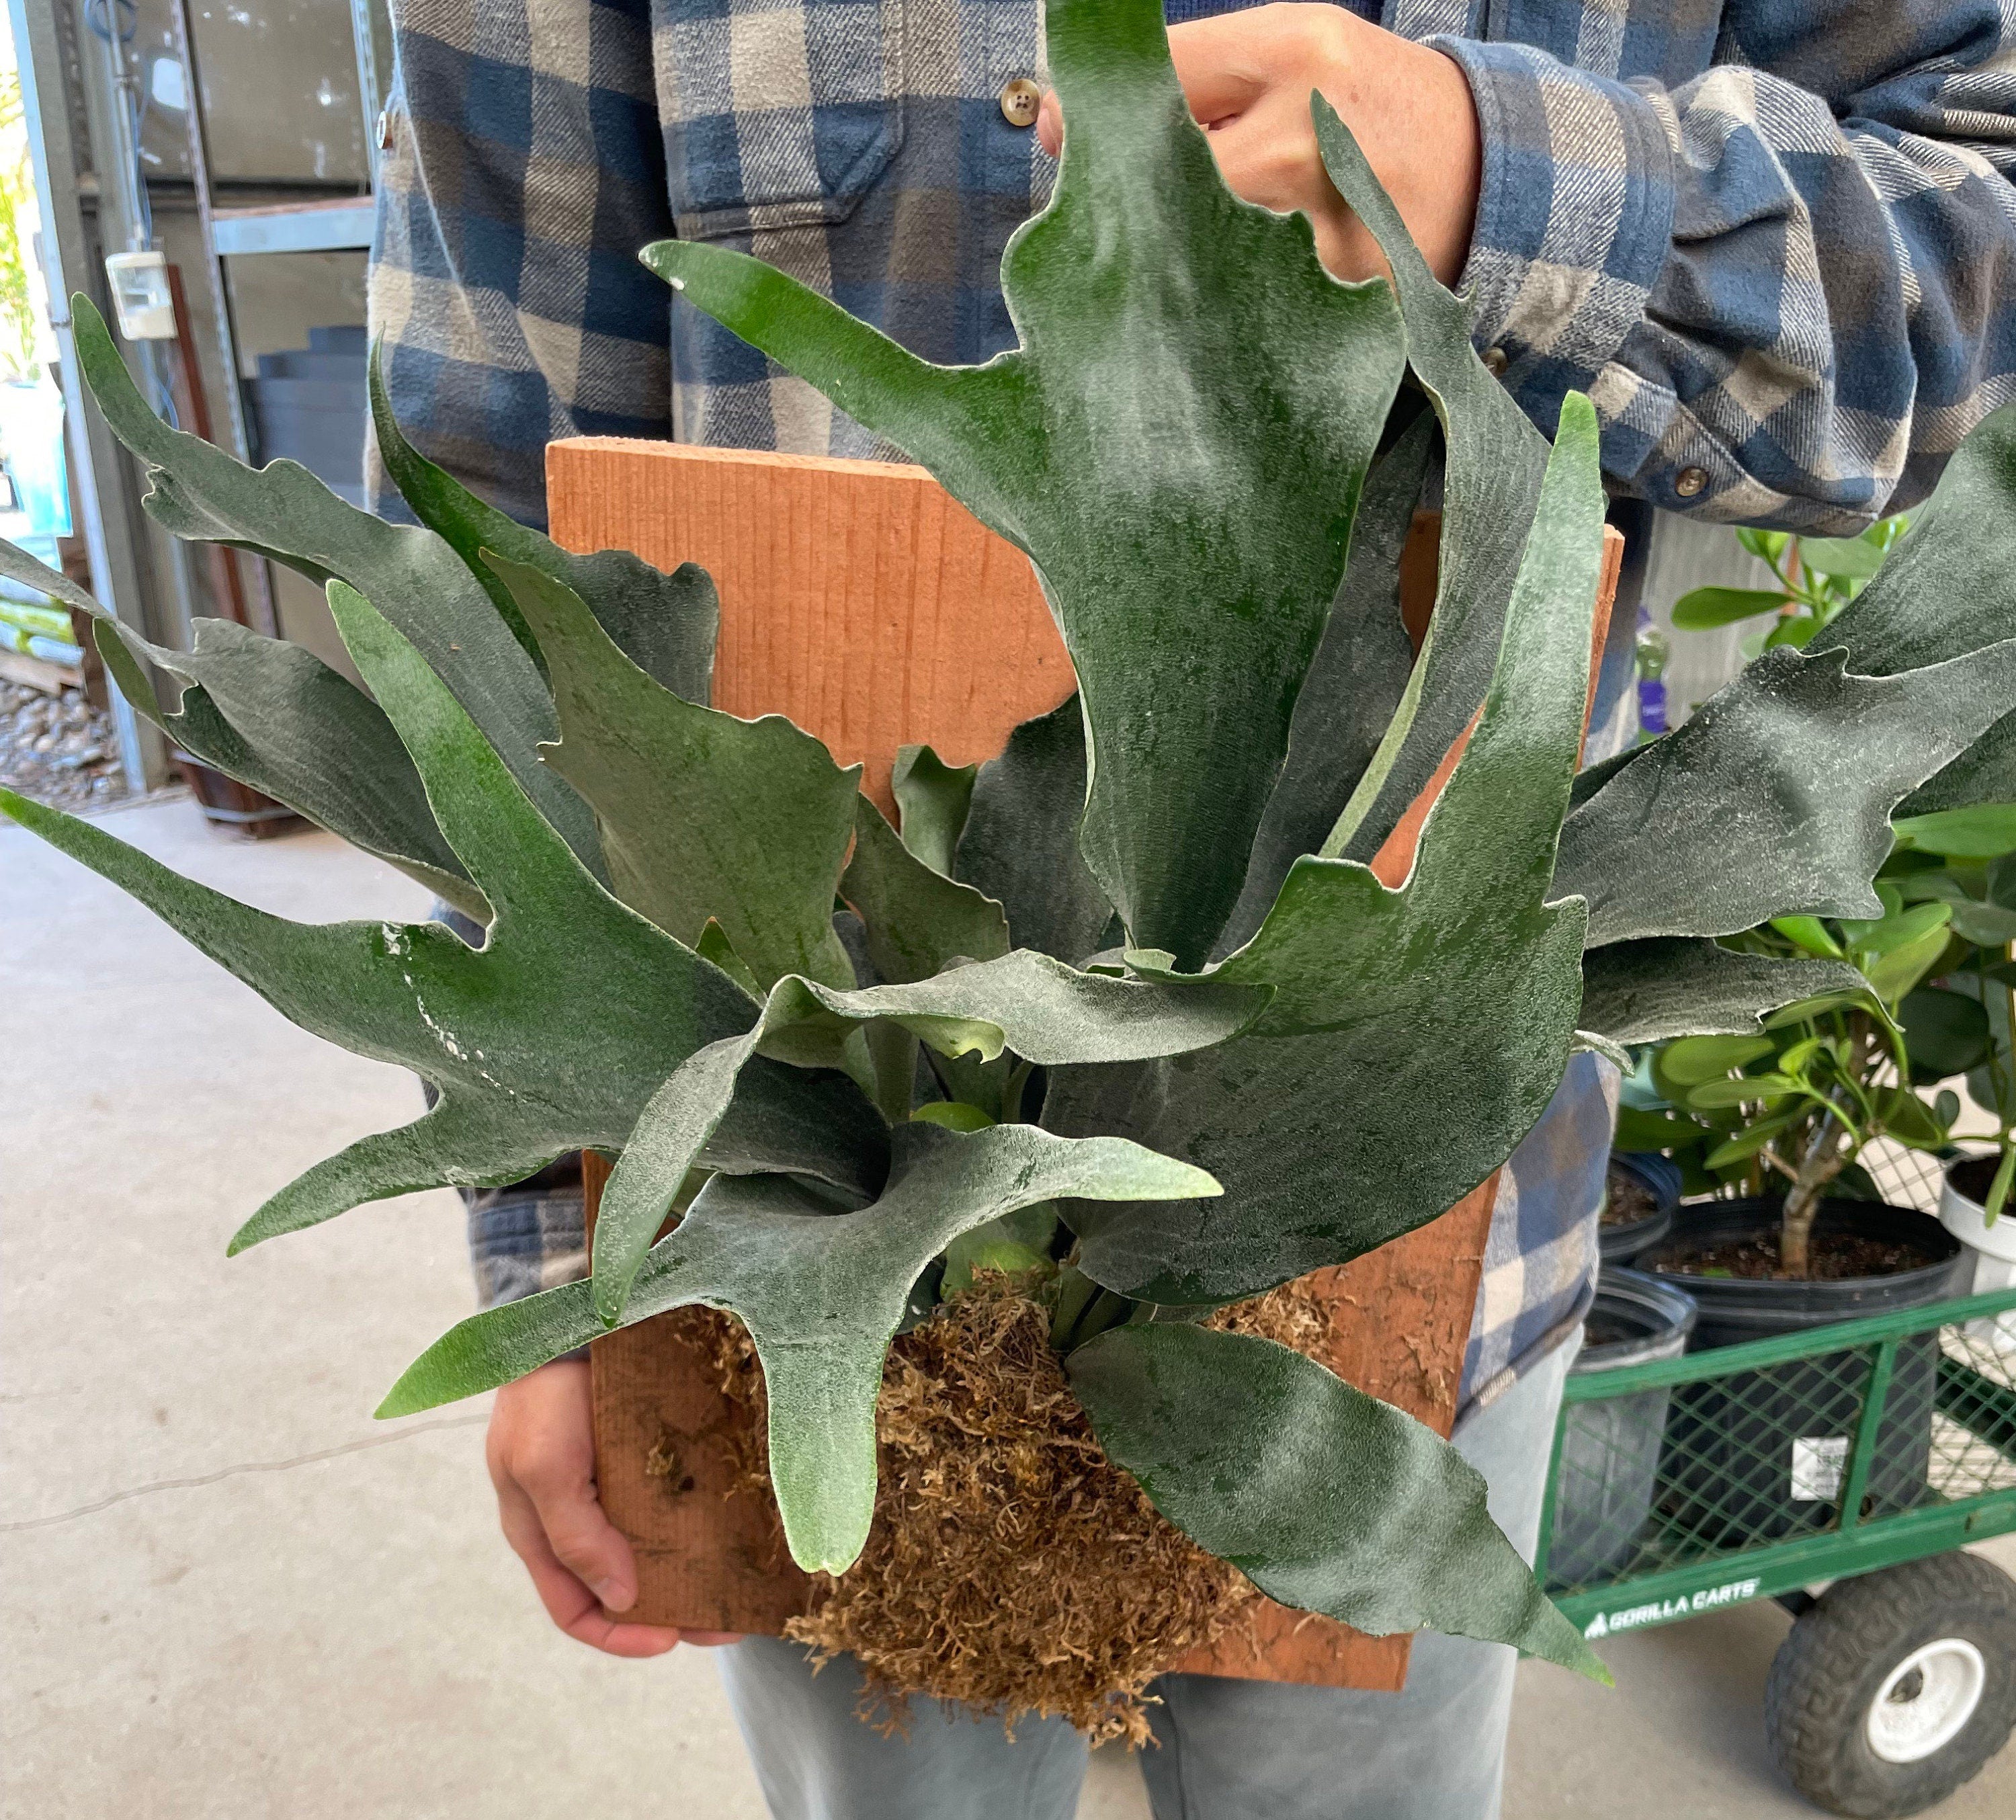 XL -16 by 6 Mounted Staghorn fern on red wood - similar to photo not exact-Platycerium bifurcatum-elkhorn fern -easy care